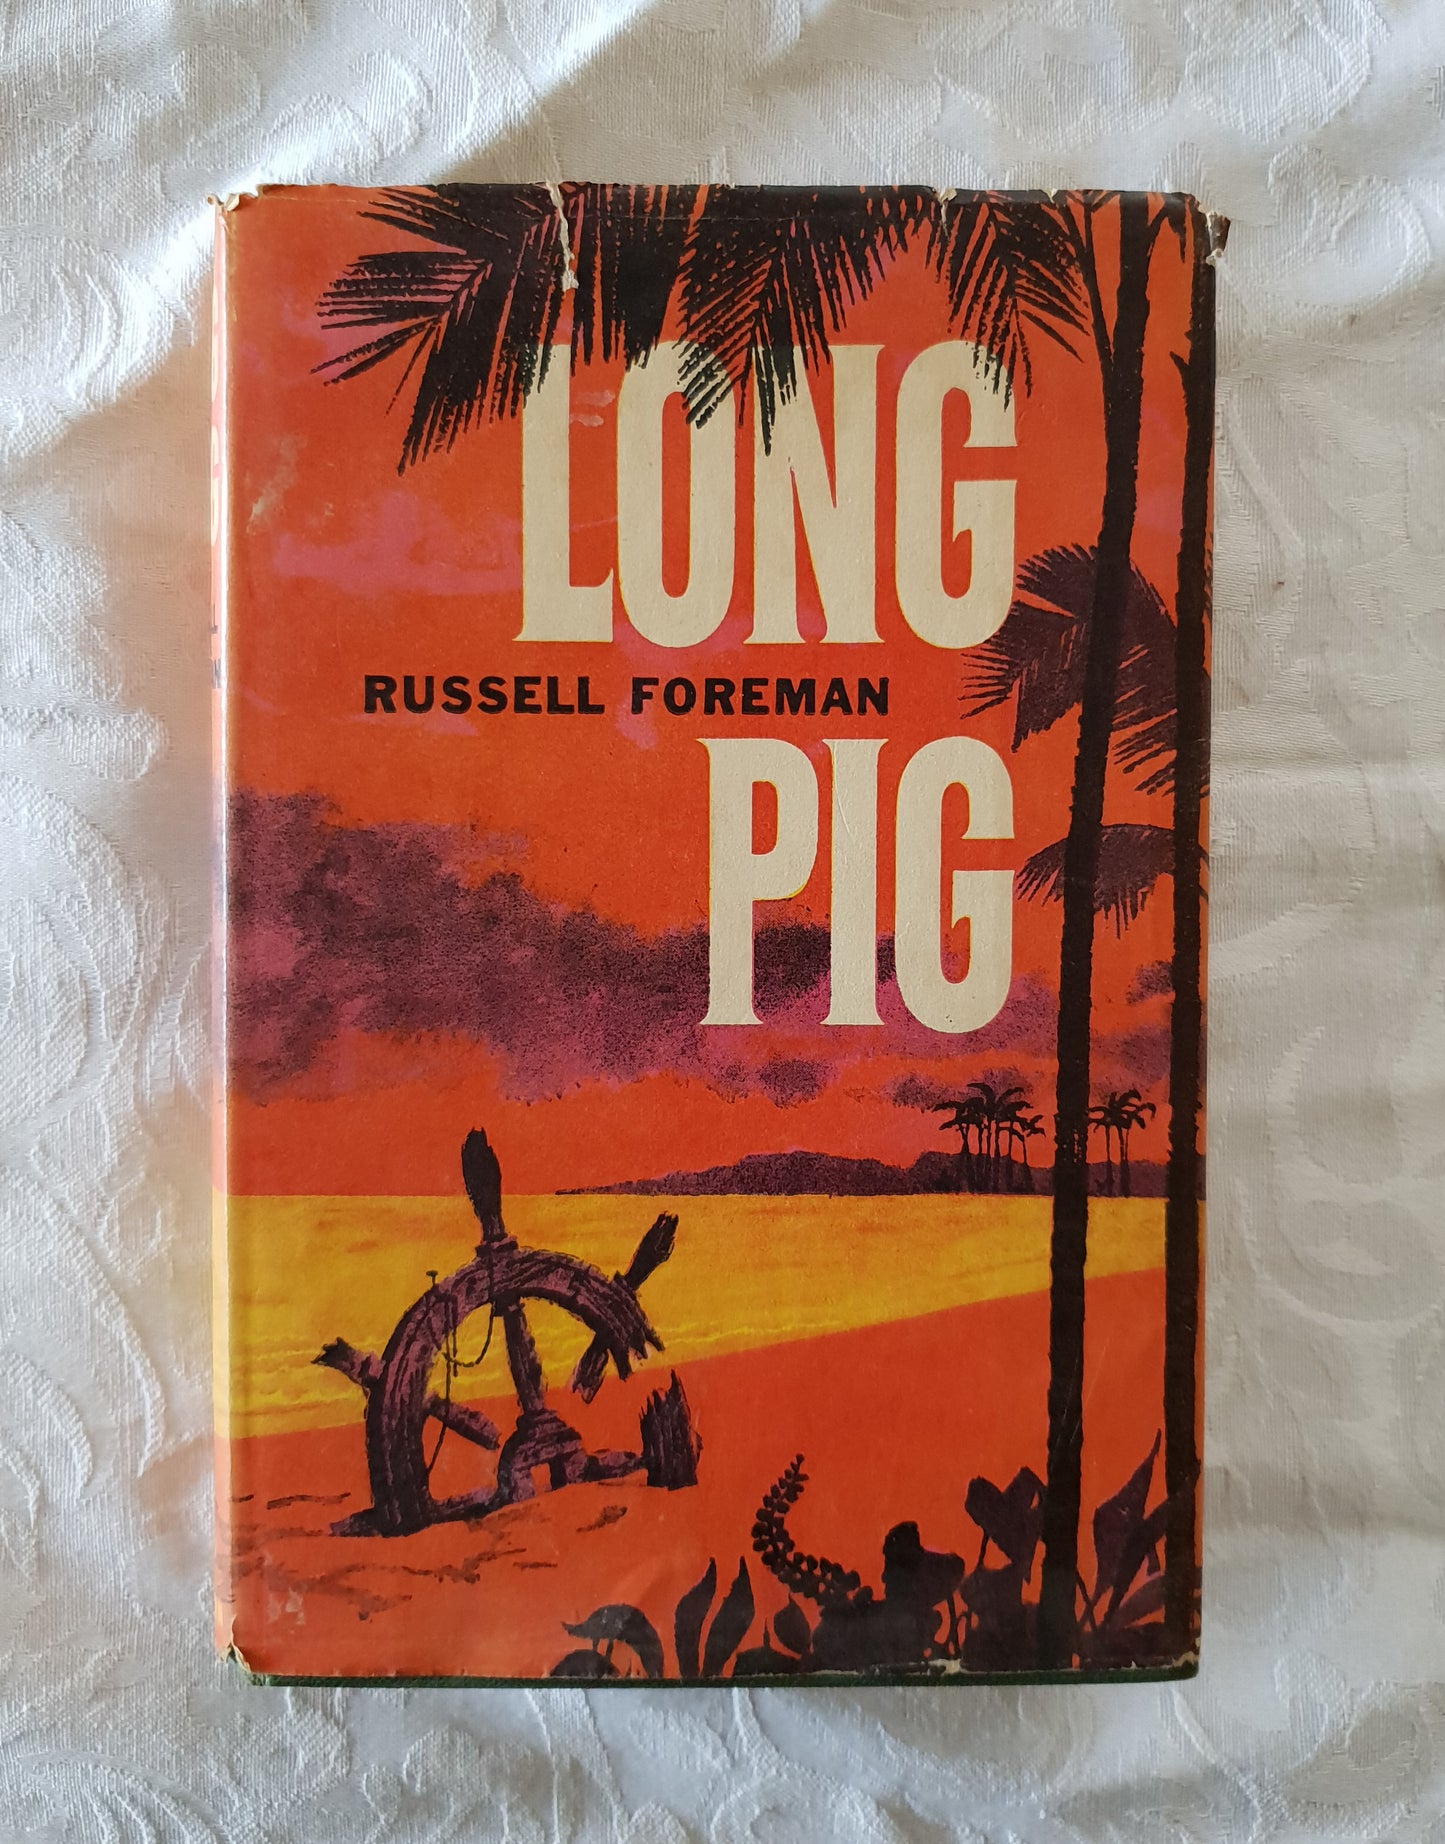 Long Pig by Russell Foreman